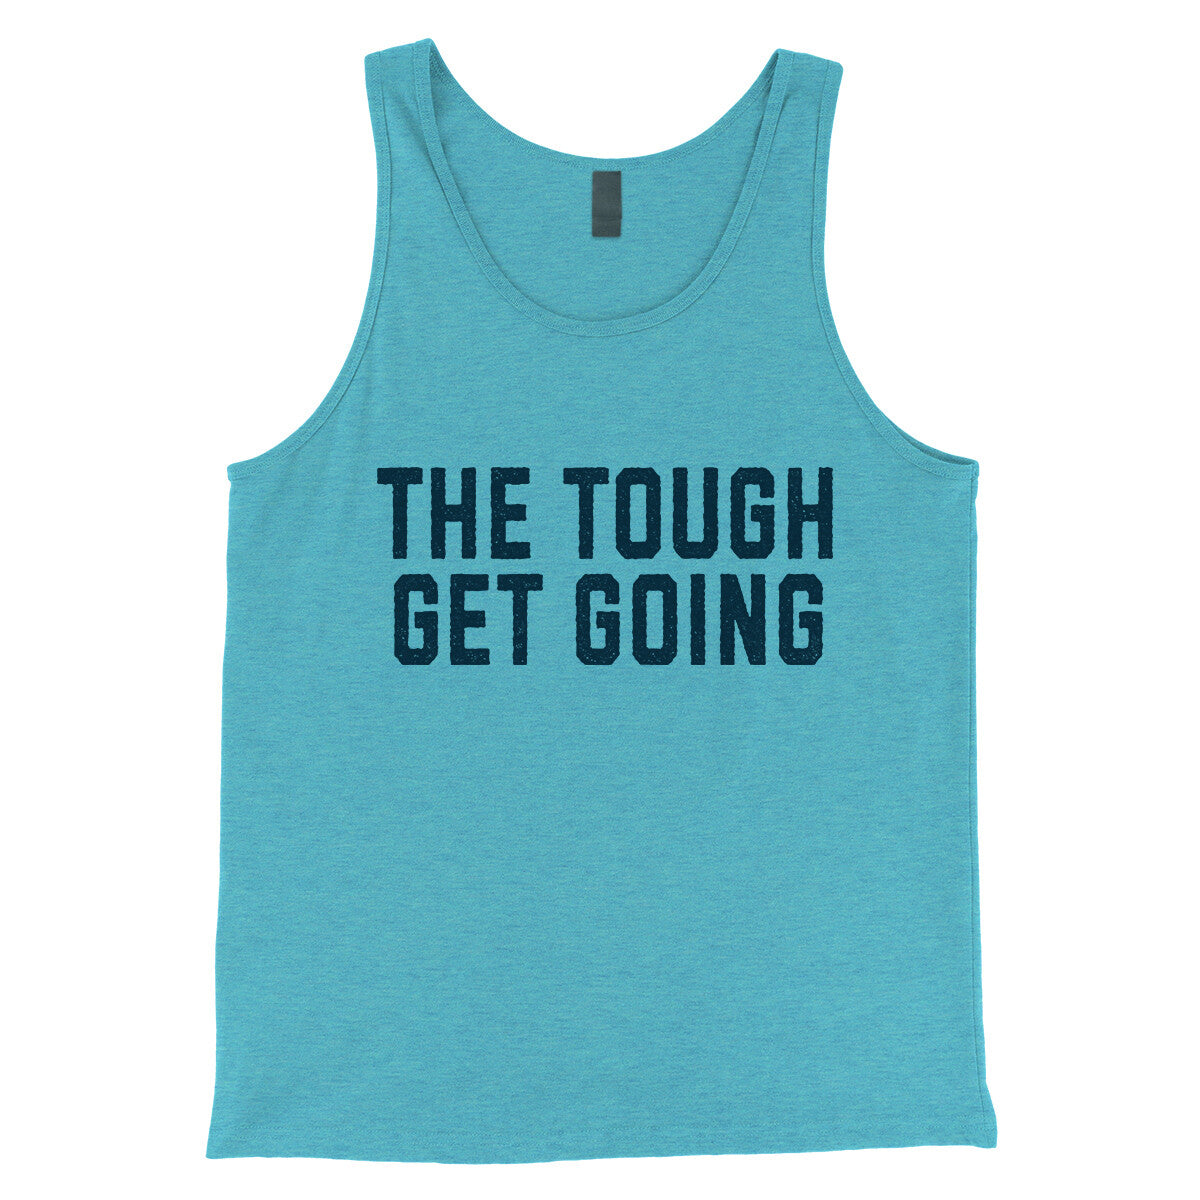 The Tough Get Going in Aqua Triblend Color